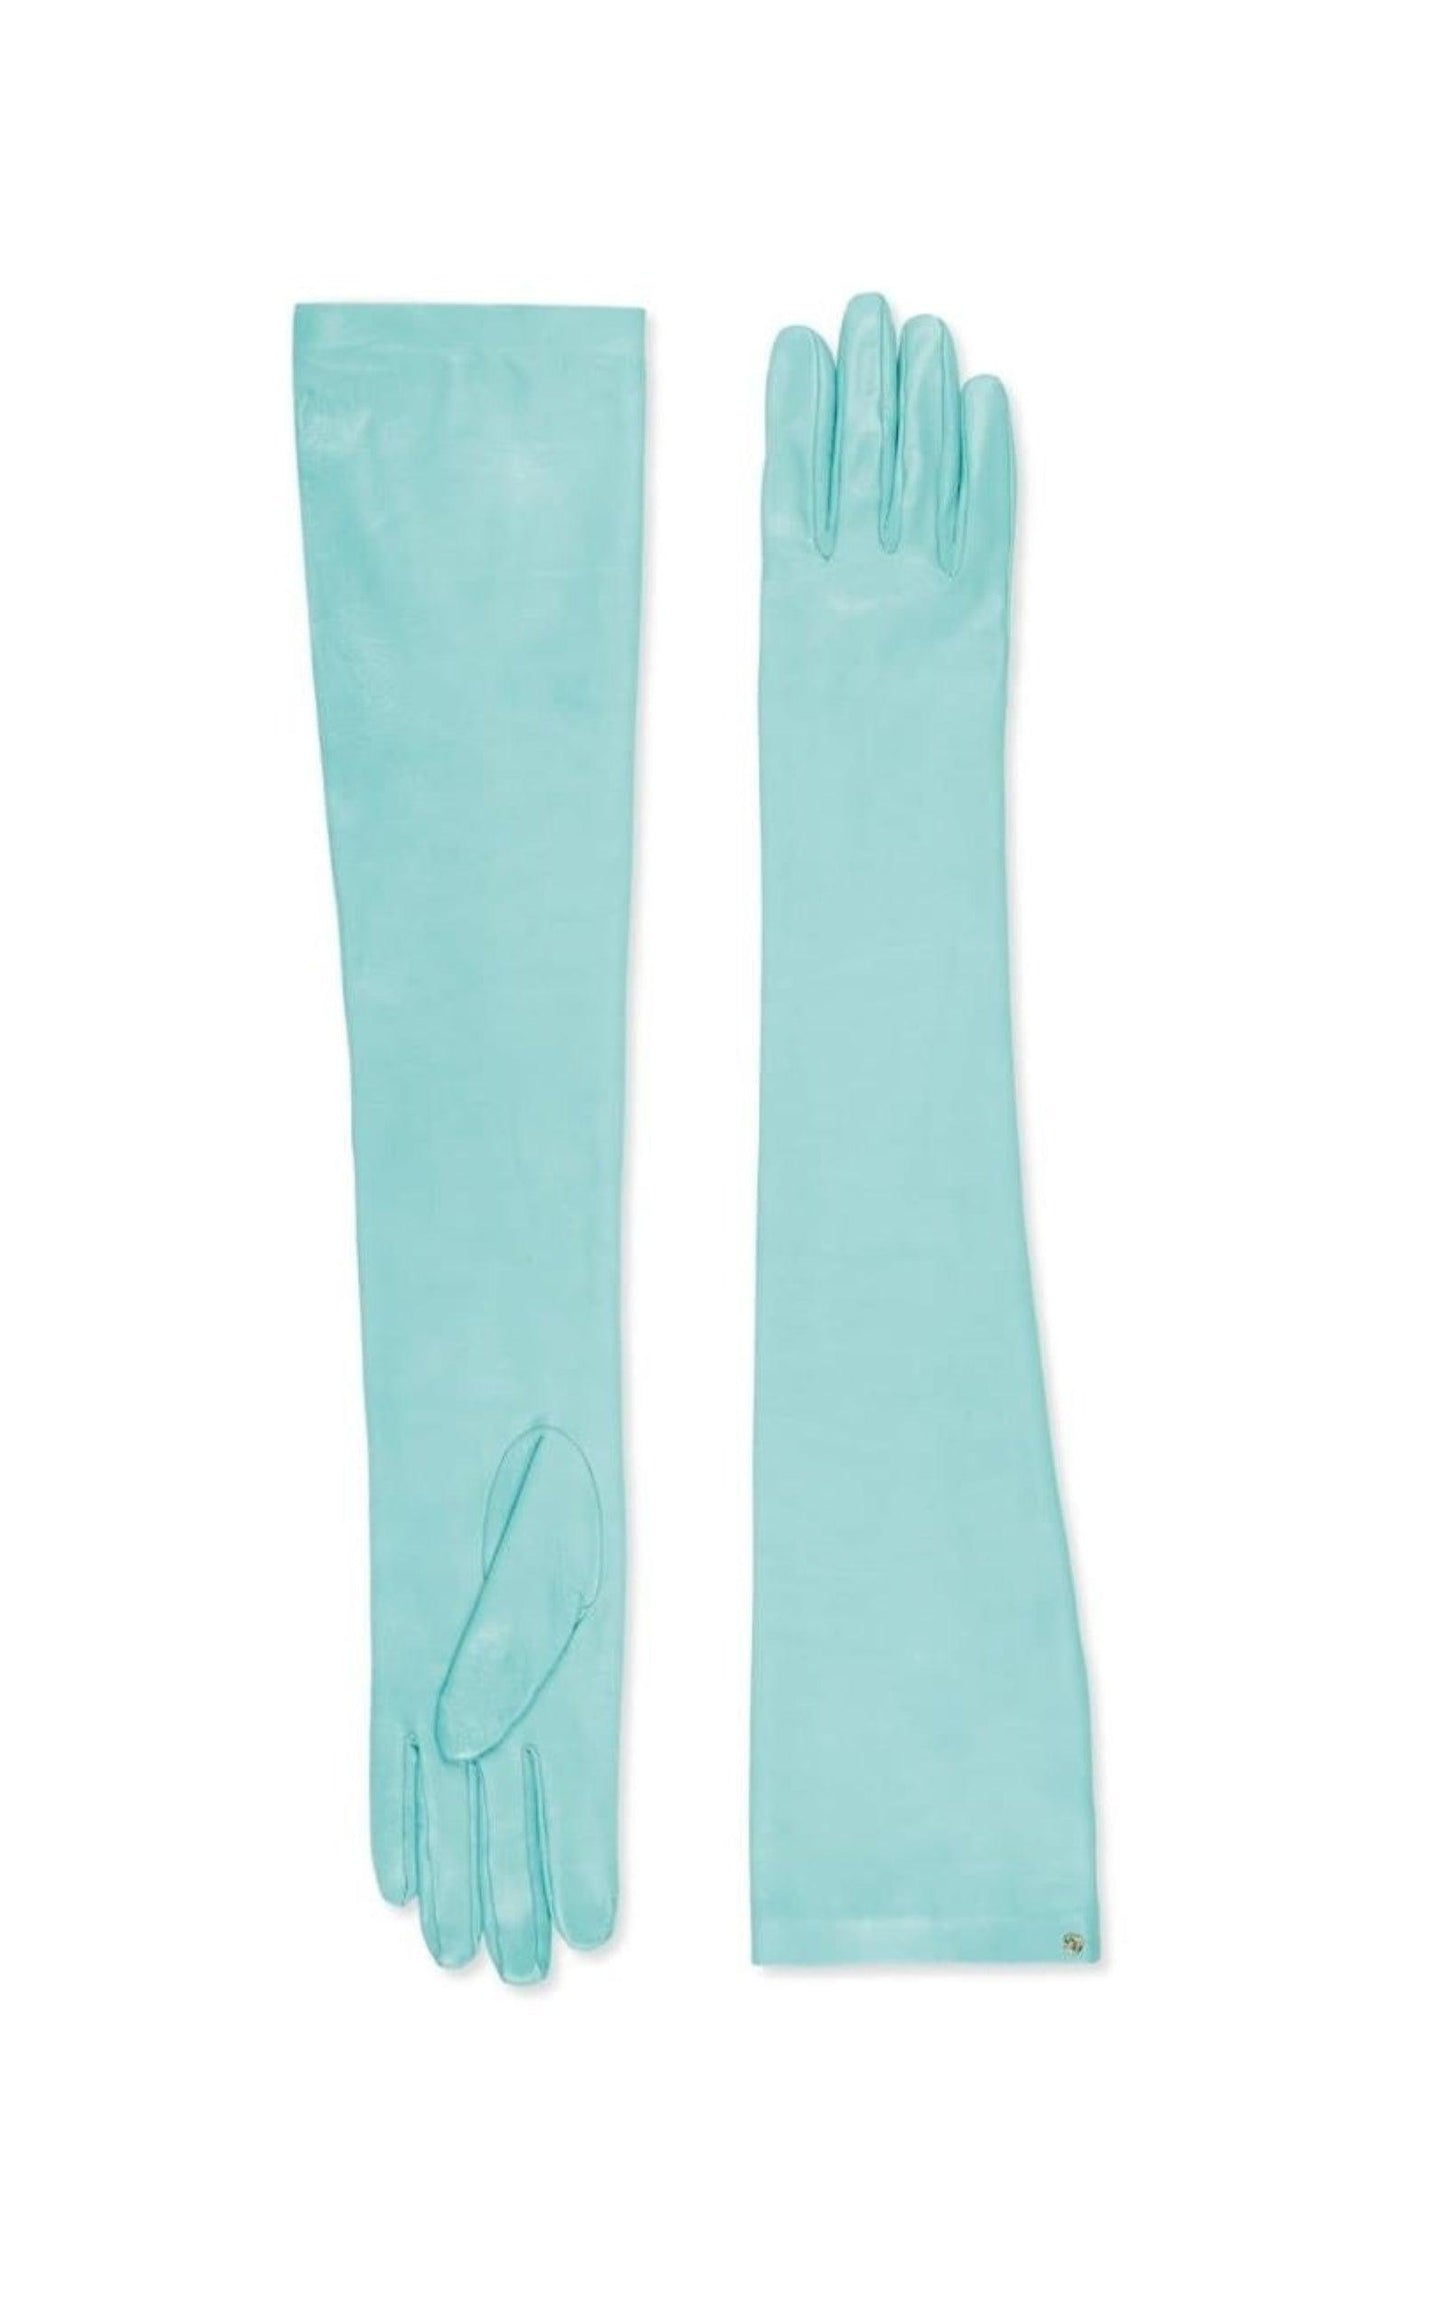  GucciOpera Blue Leather Gloves - Runway Catalog